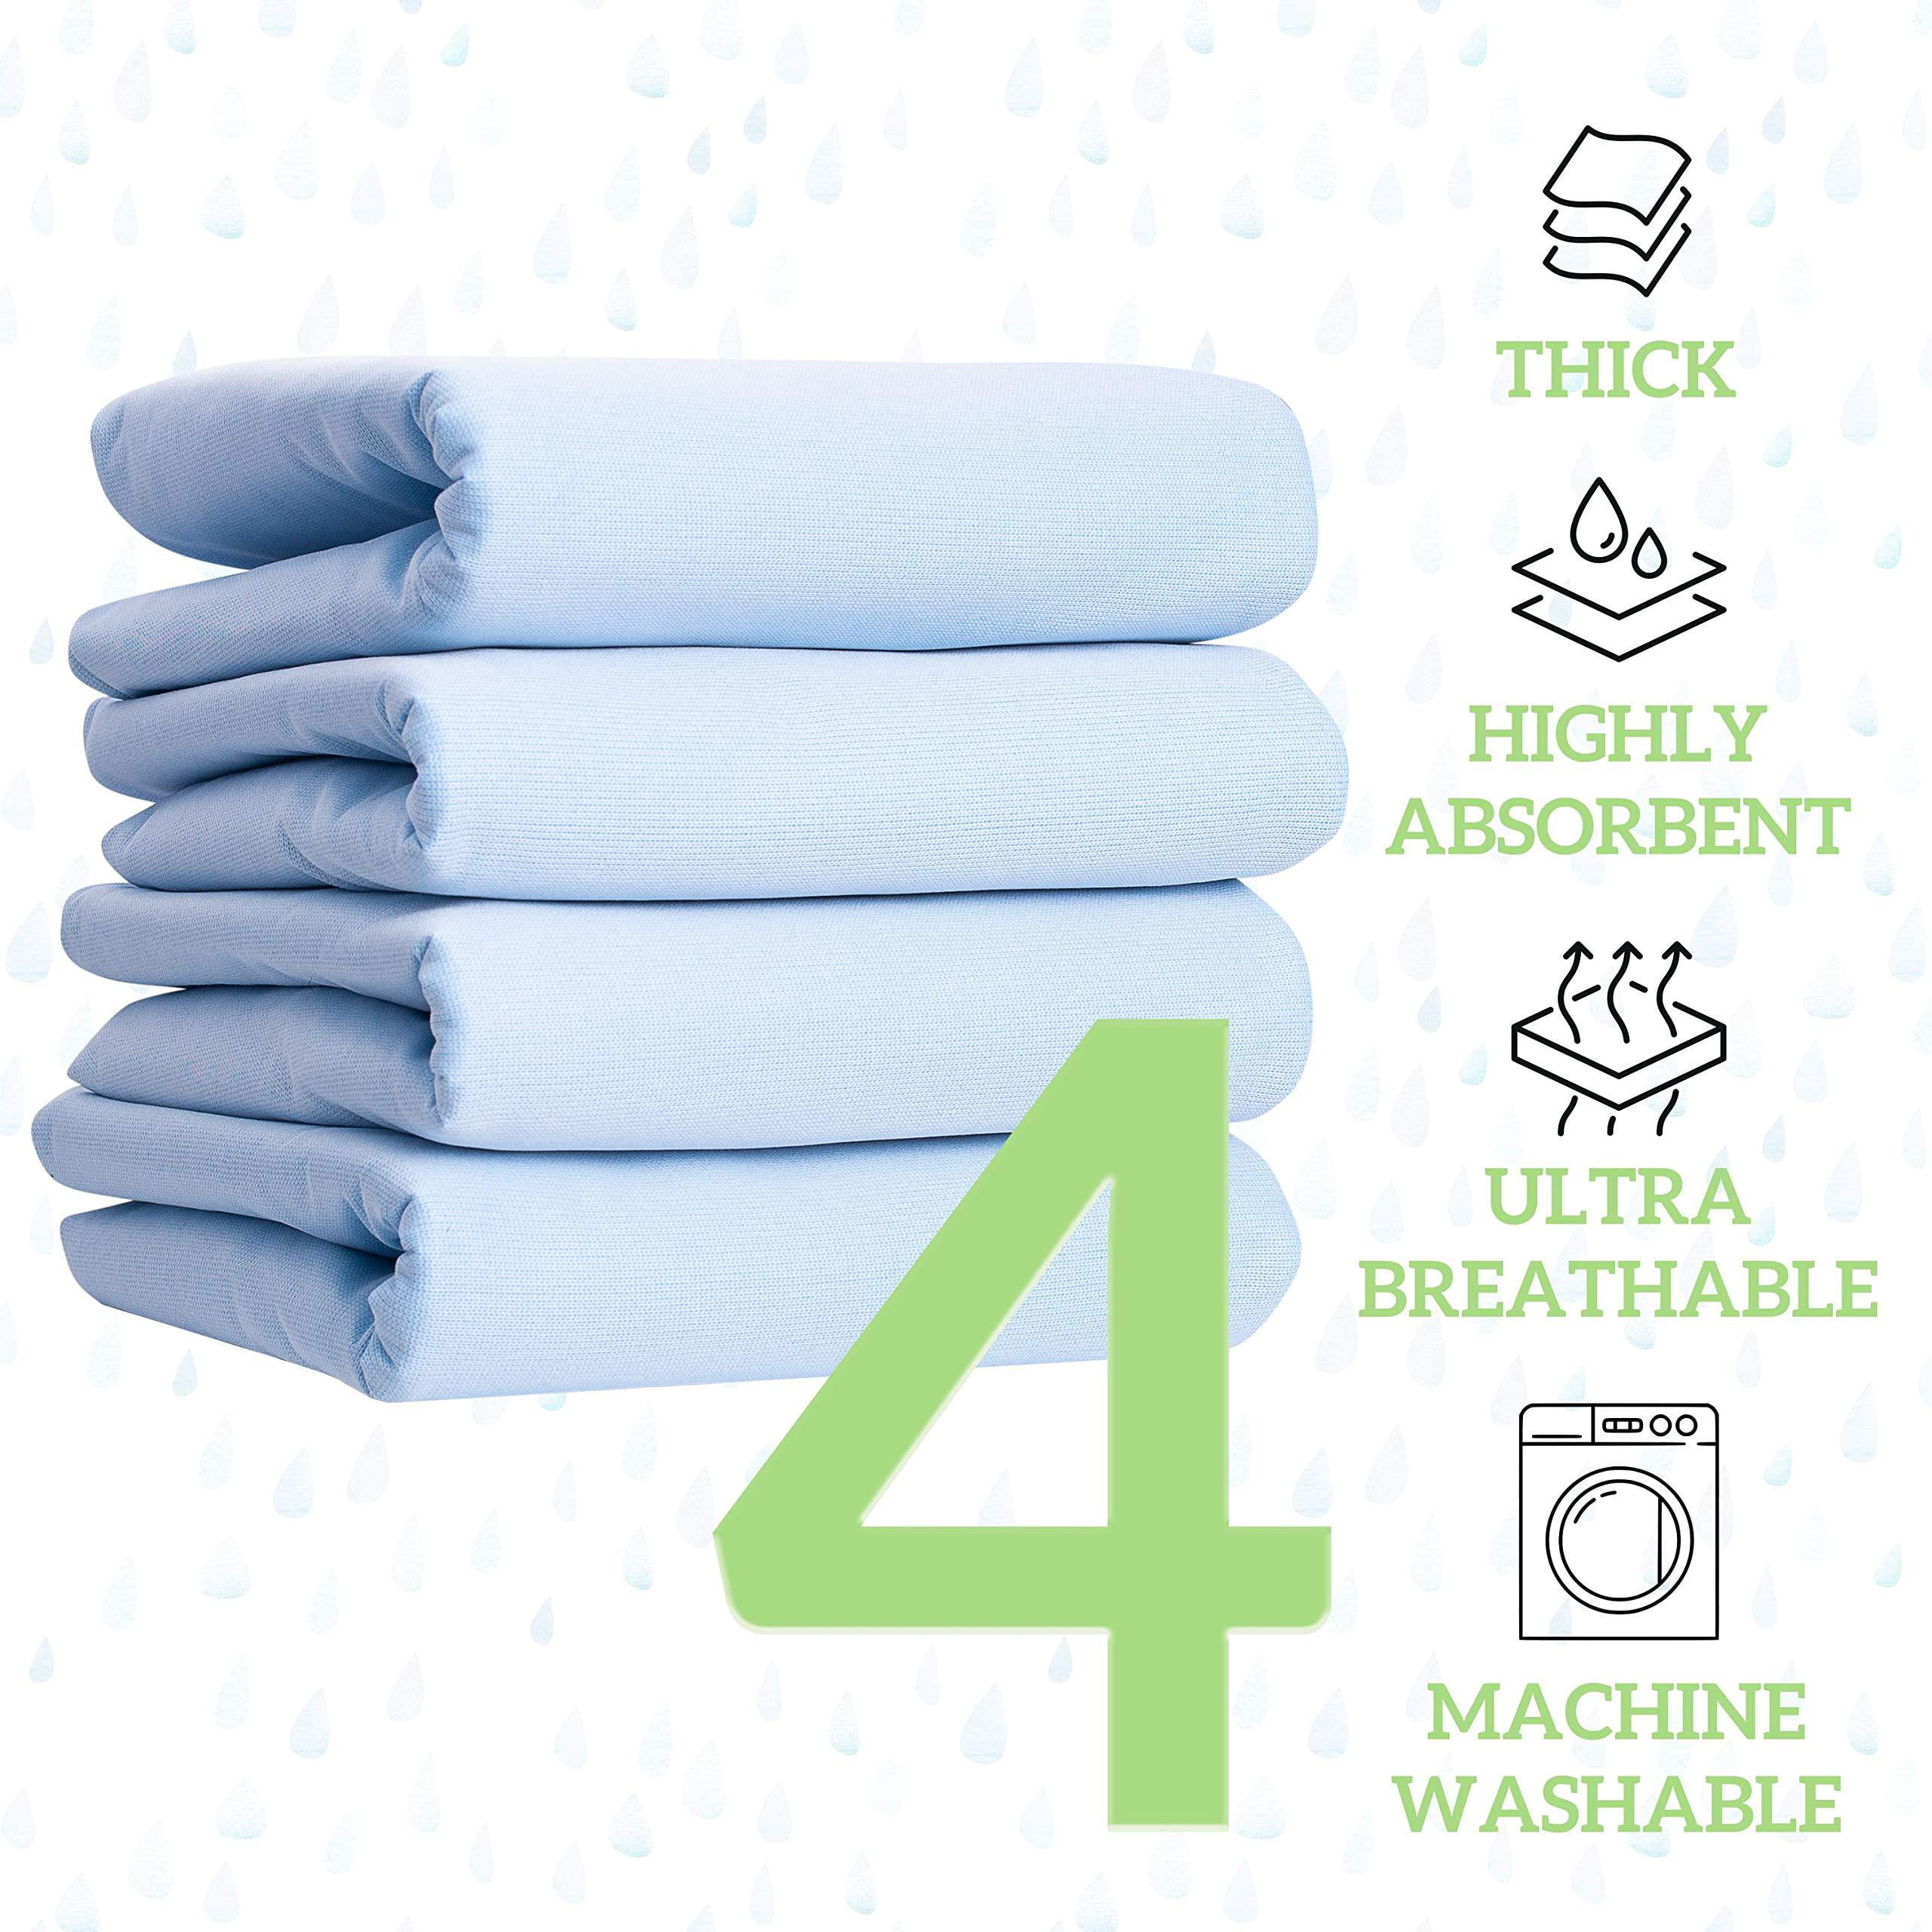 Linteum Textile (4-Pack, 34x36 in, Light Blue) Washable Reusable UNDERPADS,  Made in The USA, Twill Face Fabric, Waterproof Incontinence Bed Pads 